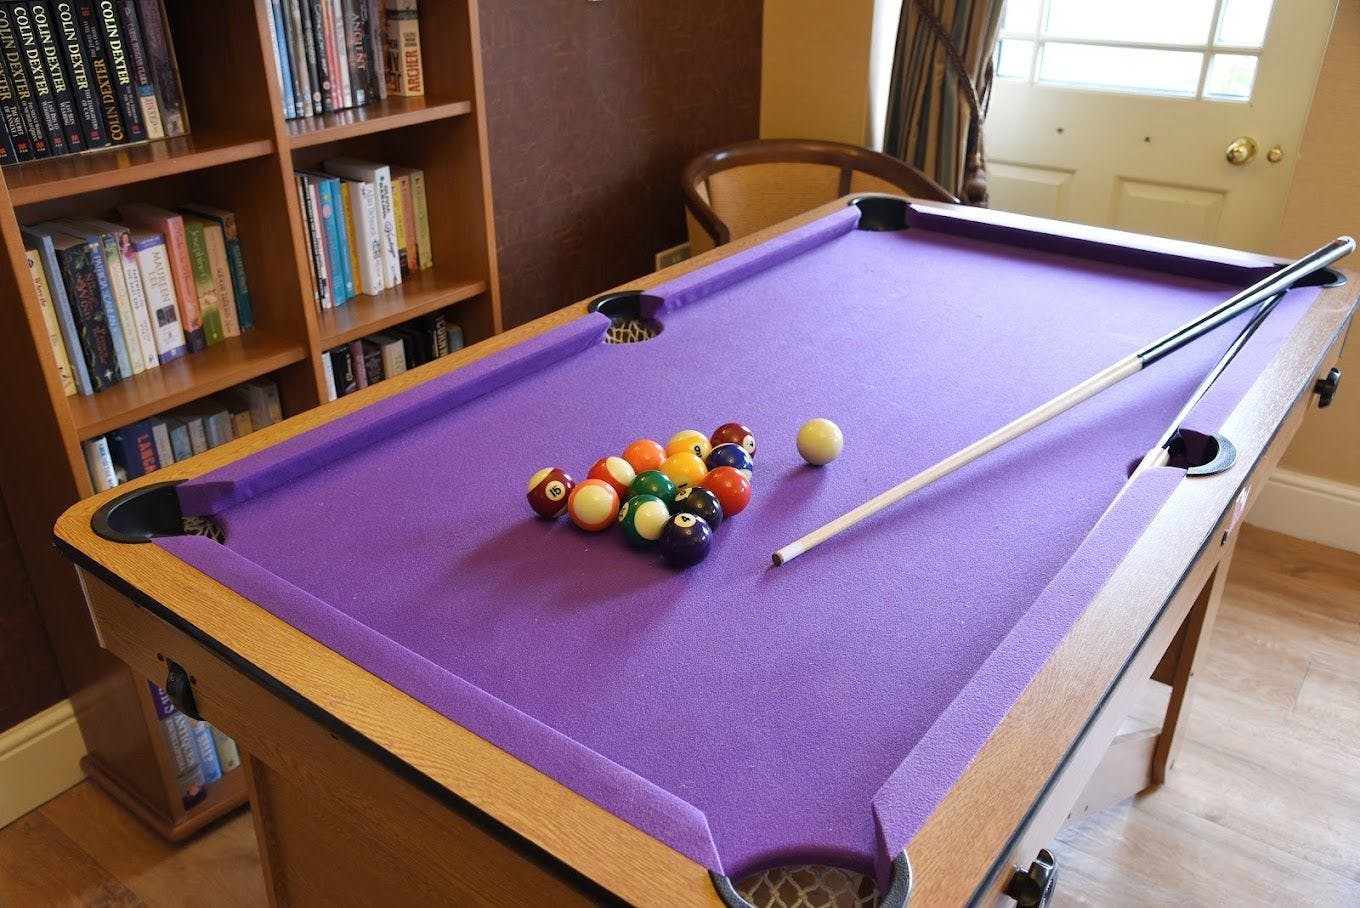 Pool at Sunnyview House Care Home in Leeds, West Yorkshire